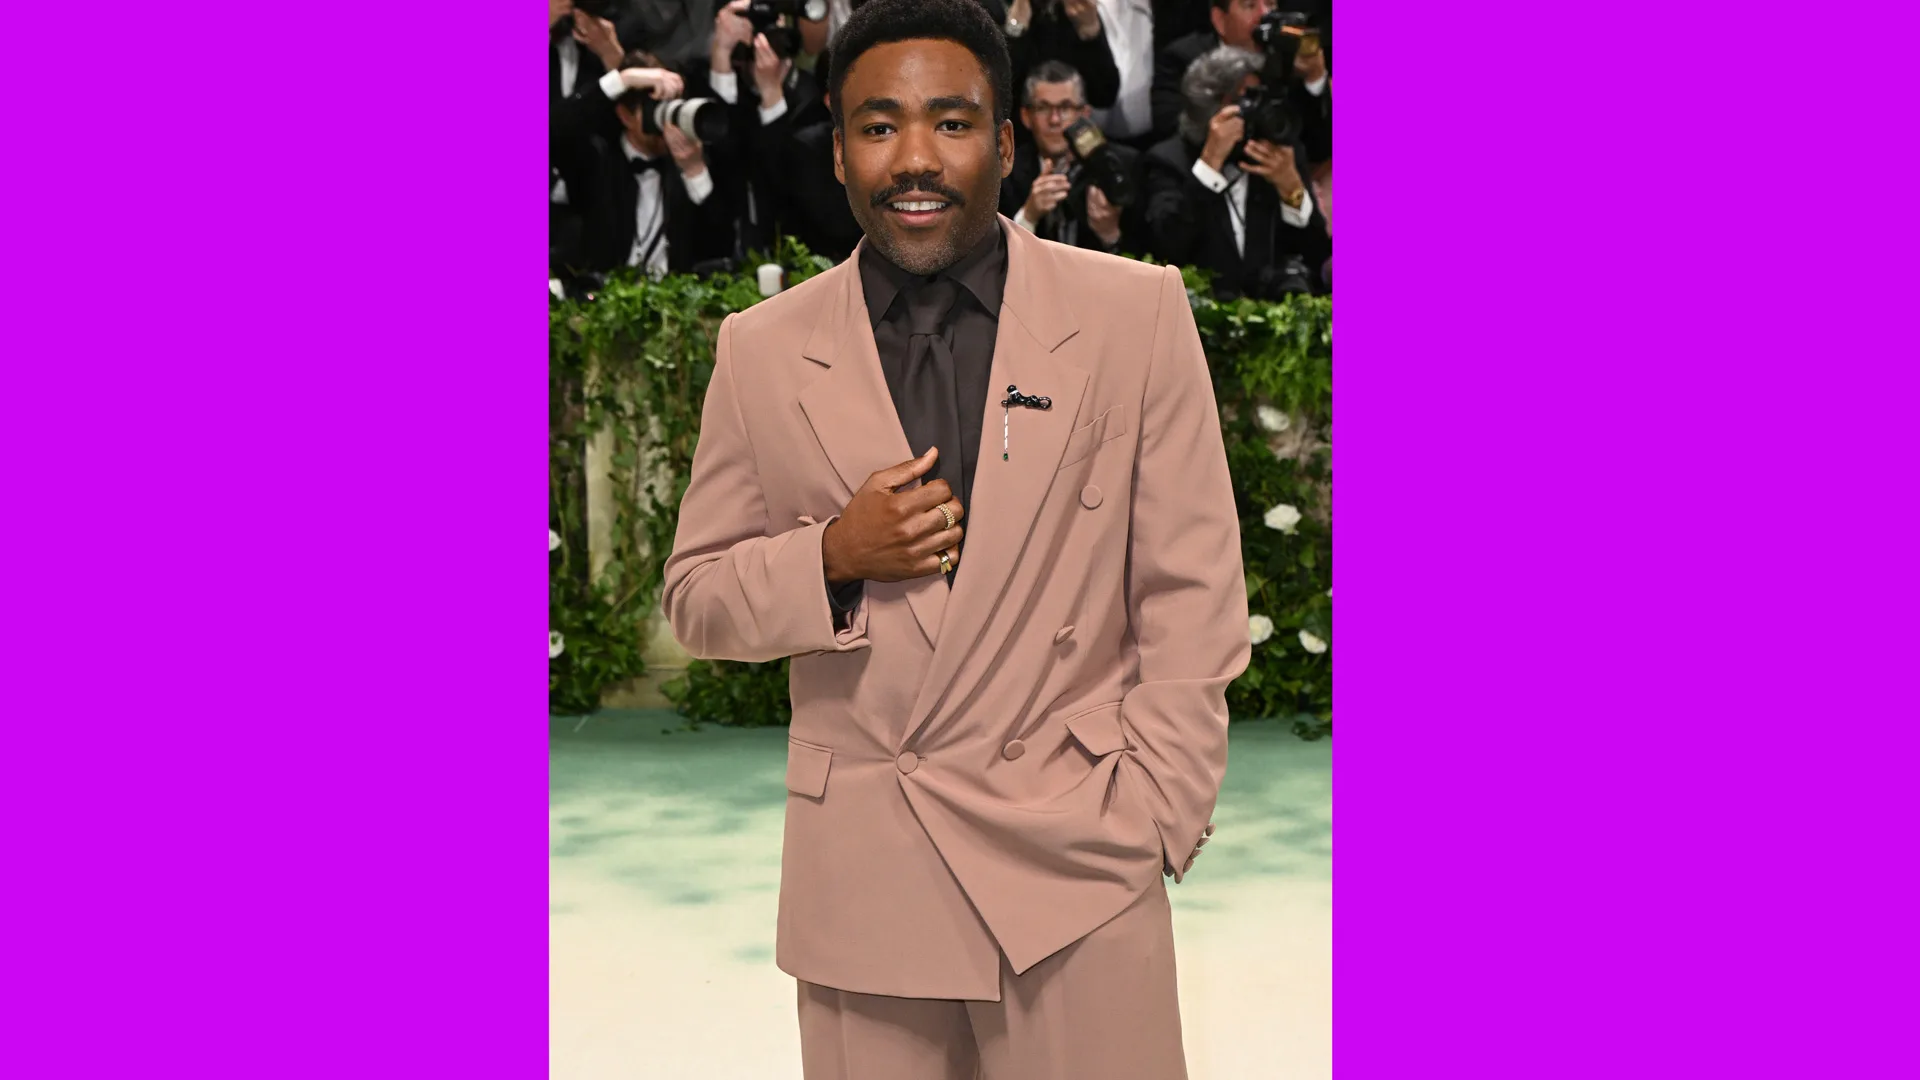 A photograph of Donald Glover at the Met Gala 2024 wearing a brown suit with press photographers behind him